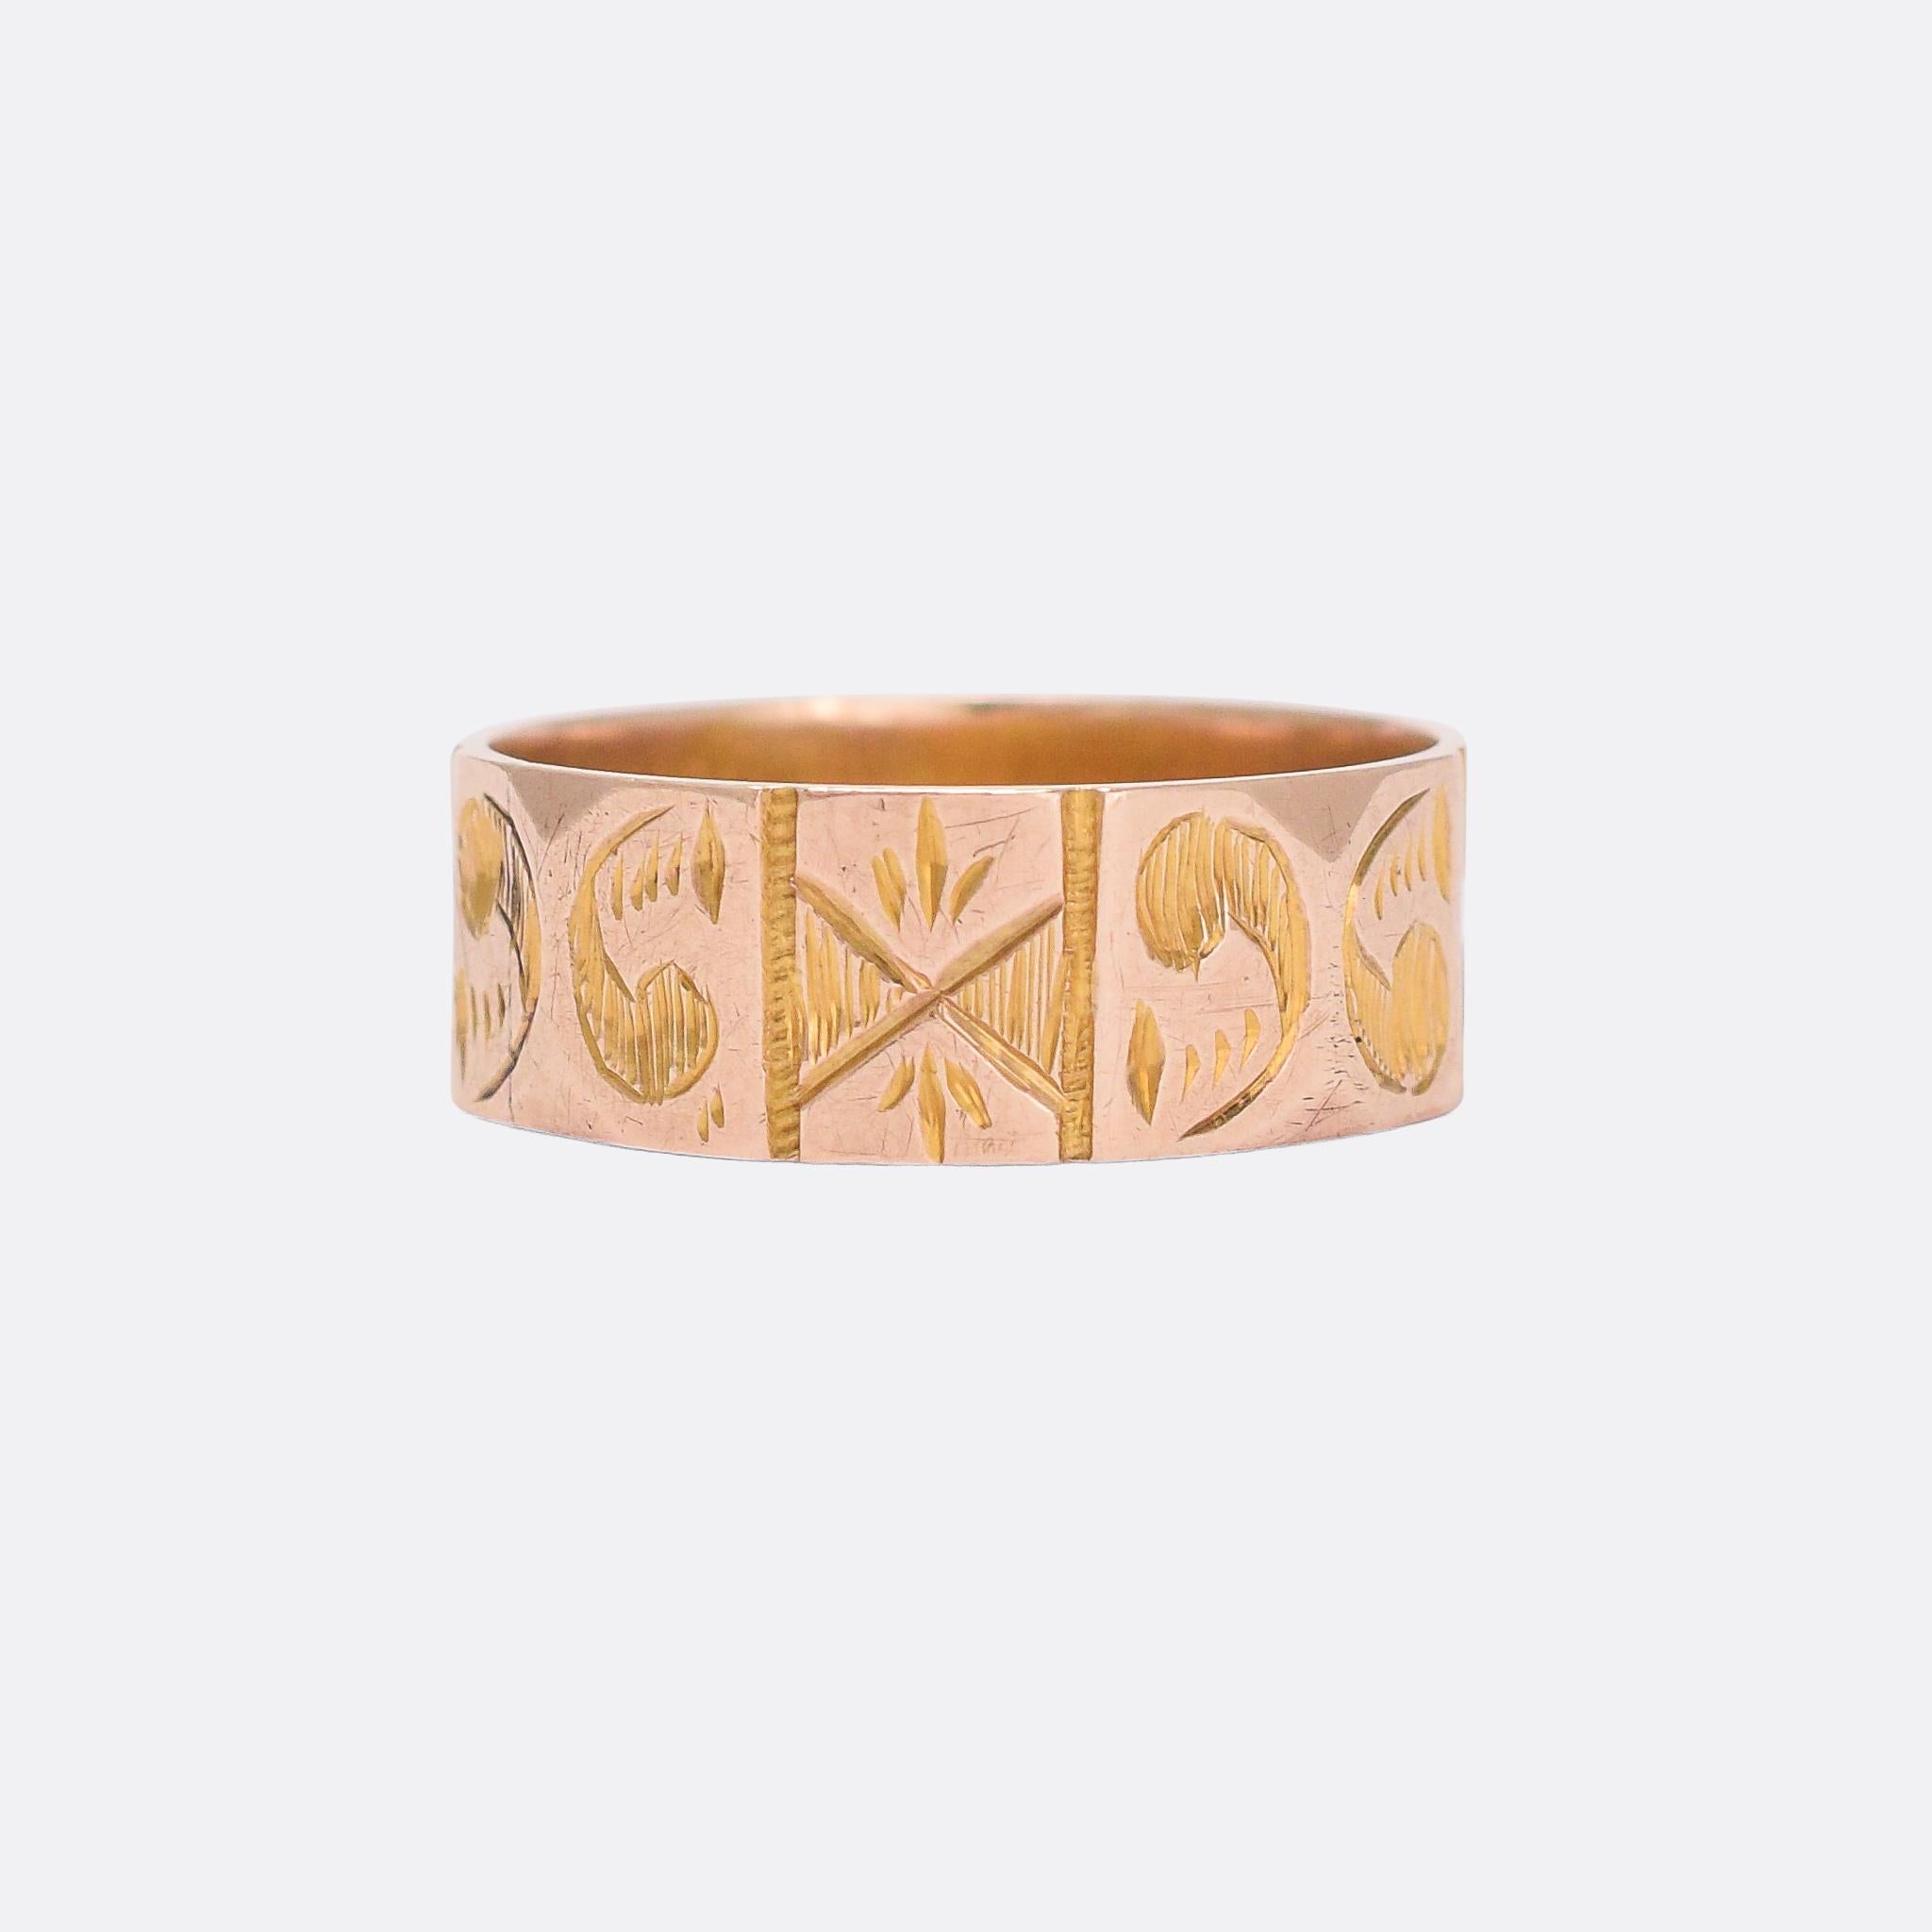 A sweet antique cigar band featuring a faceted outer edge adorned with chased star and apostrophe motifs. It's modelled in 9 karat gold and dates from 1887, with clear English hallmarks confirming the year and gold content. An attractive piece in a